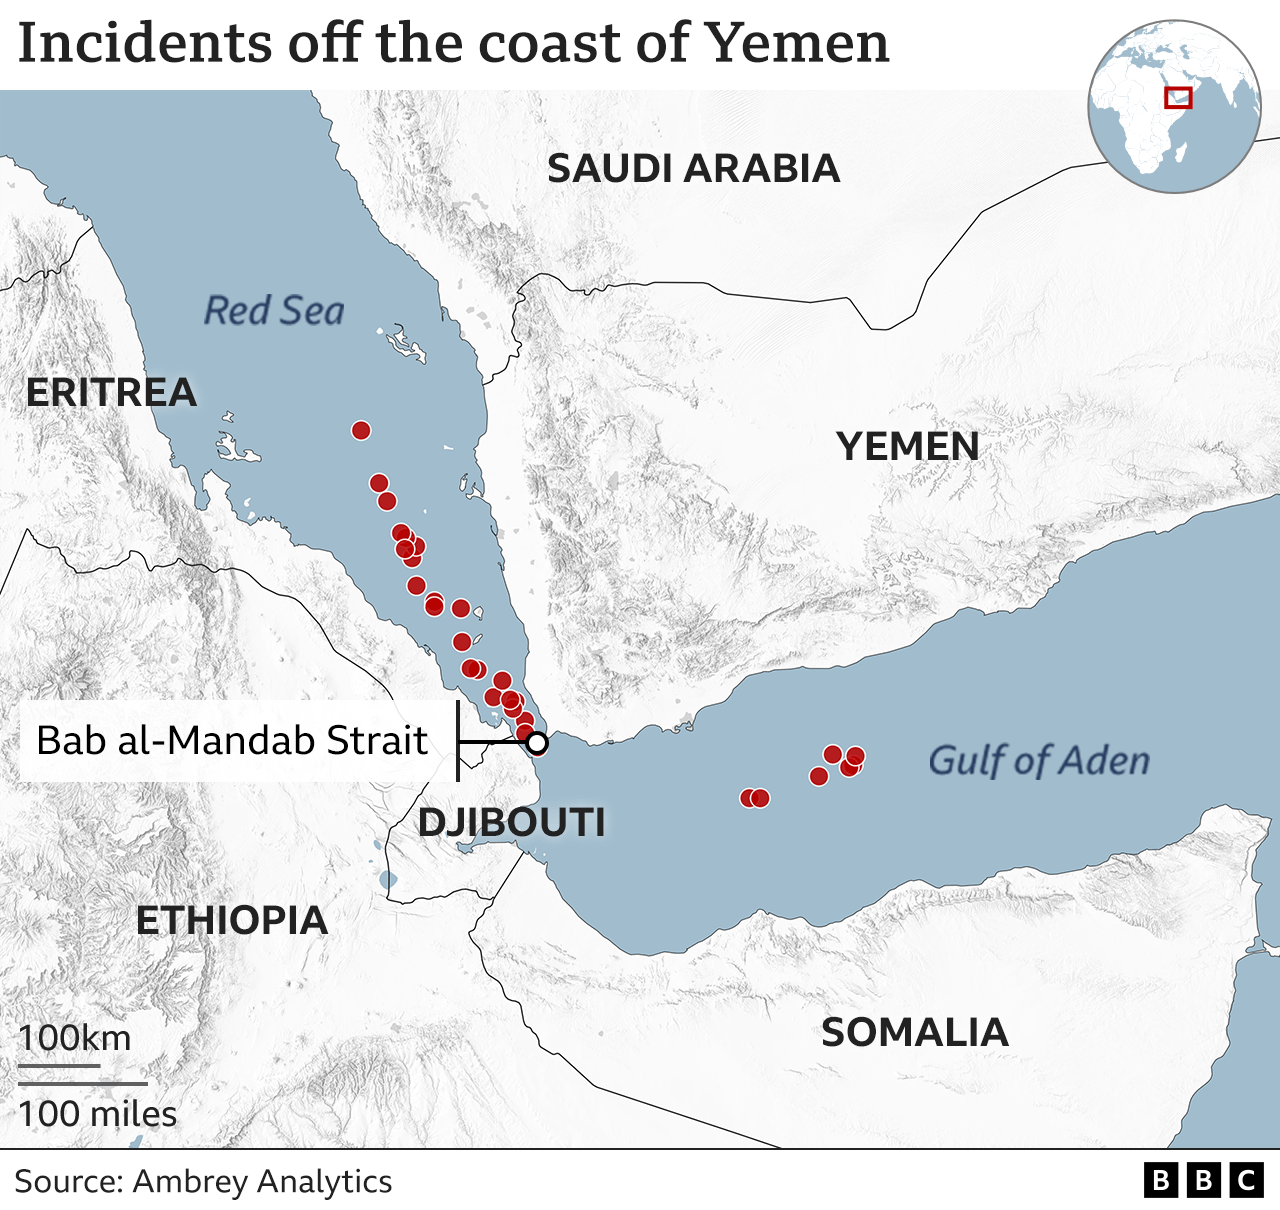 Map of Red Sea and Gulf of Aden showing attacks on shipping by Houthis